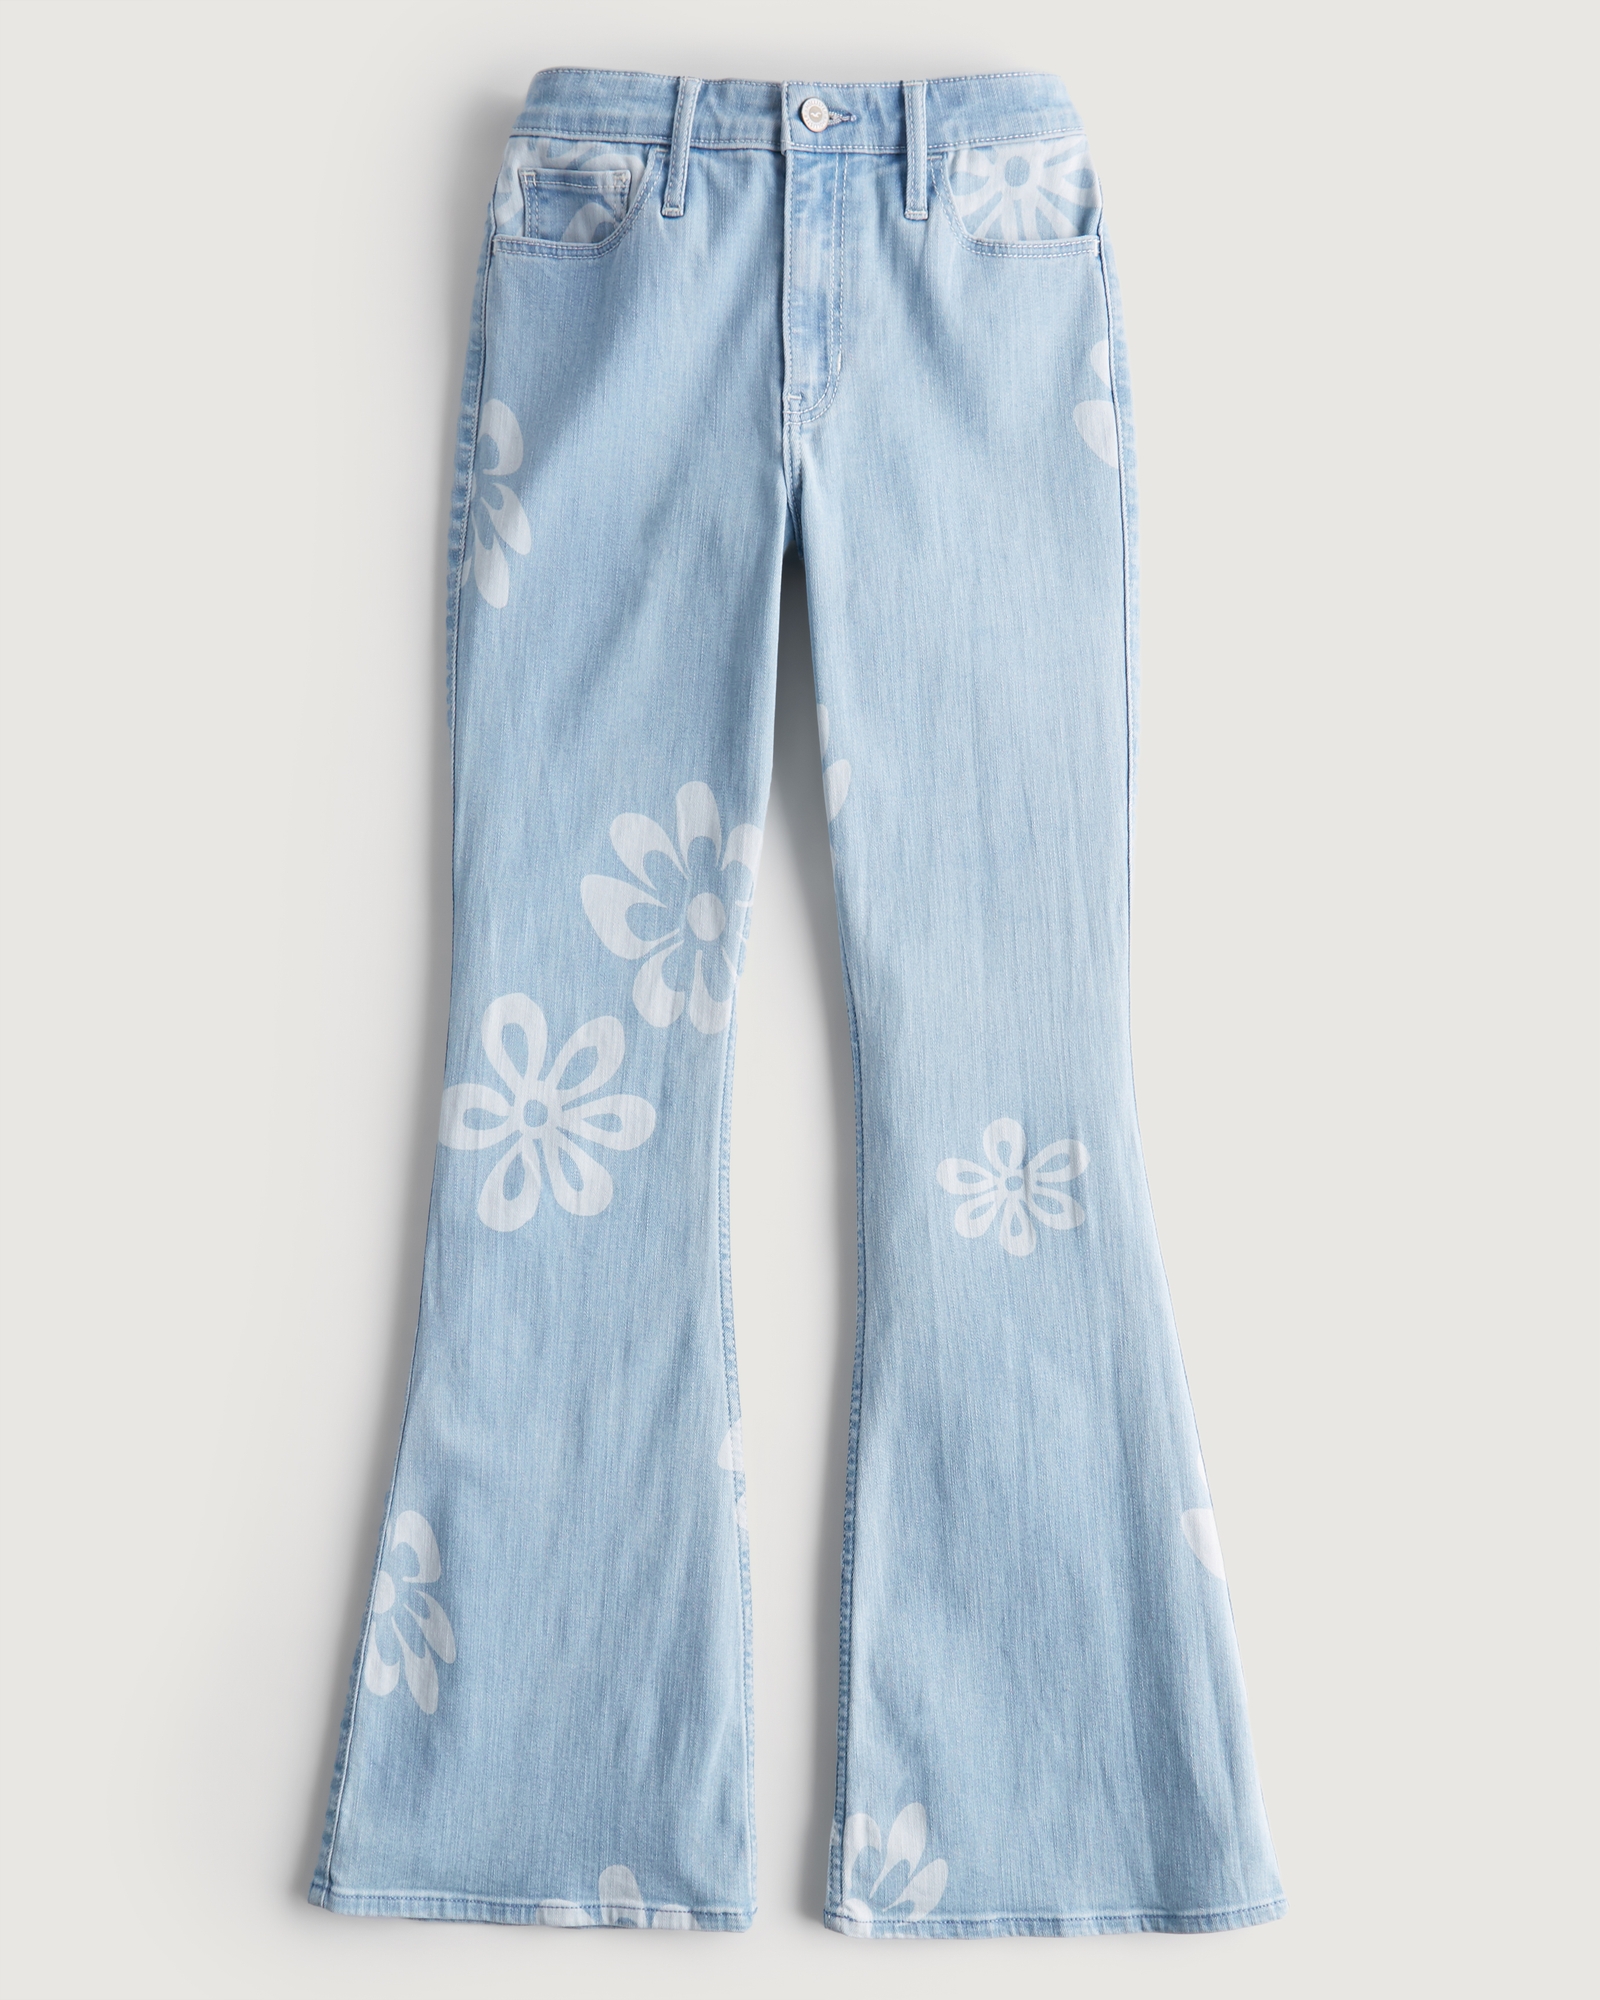 Womens Flared Bell Bottom Jeans for Women Stretch Floral